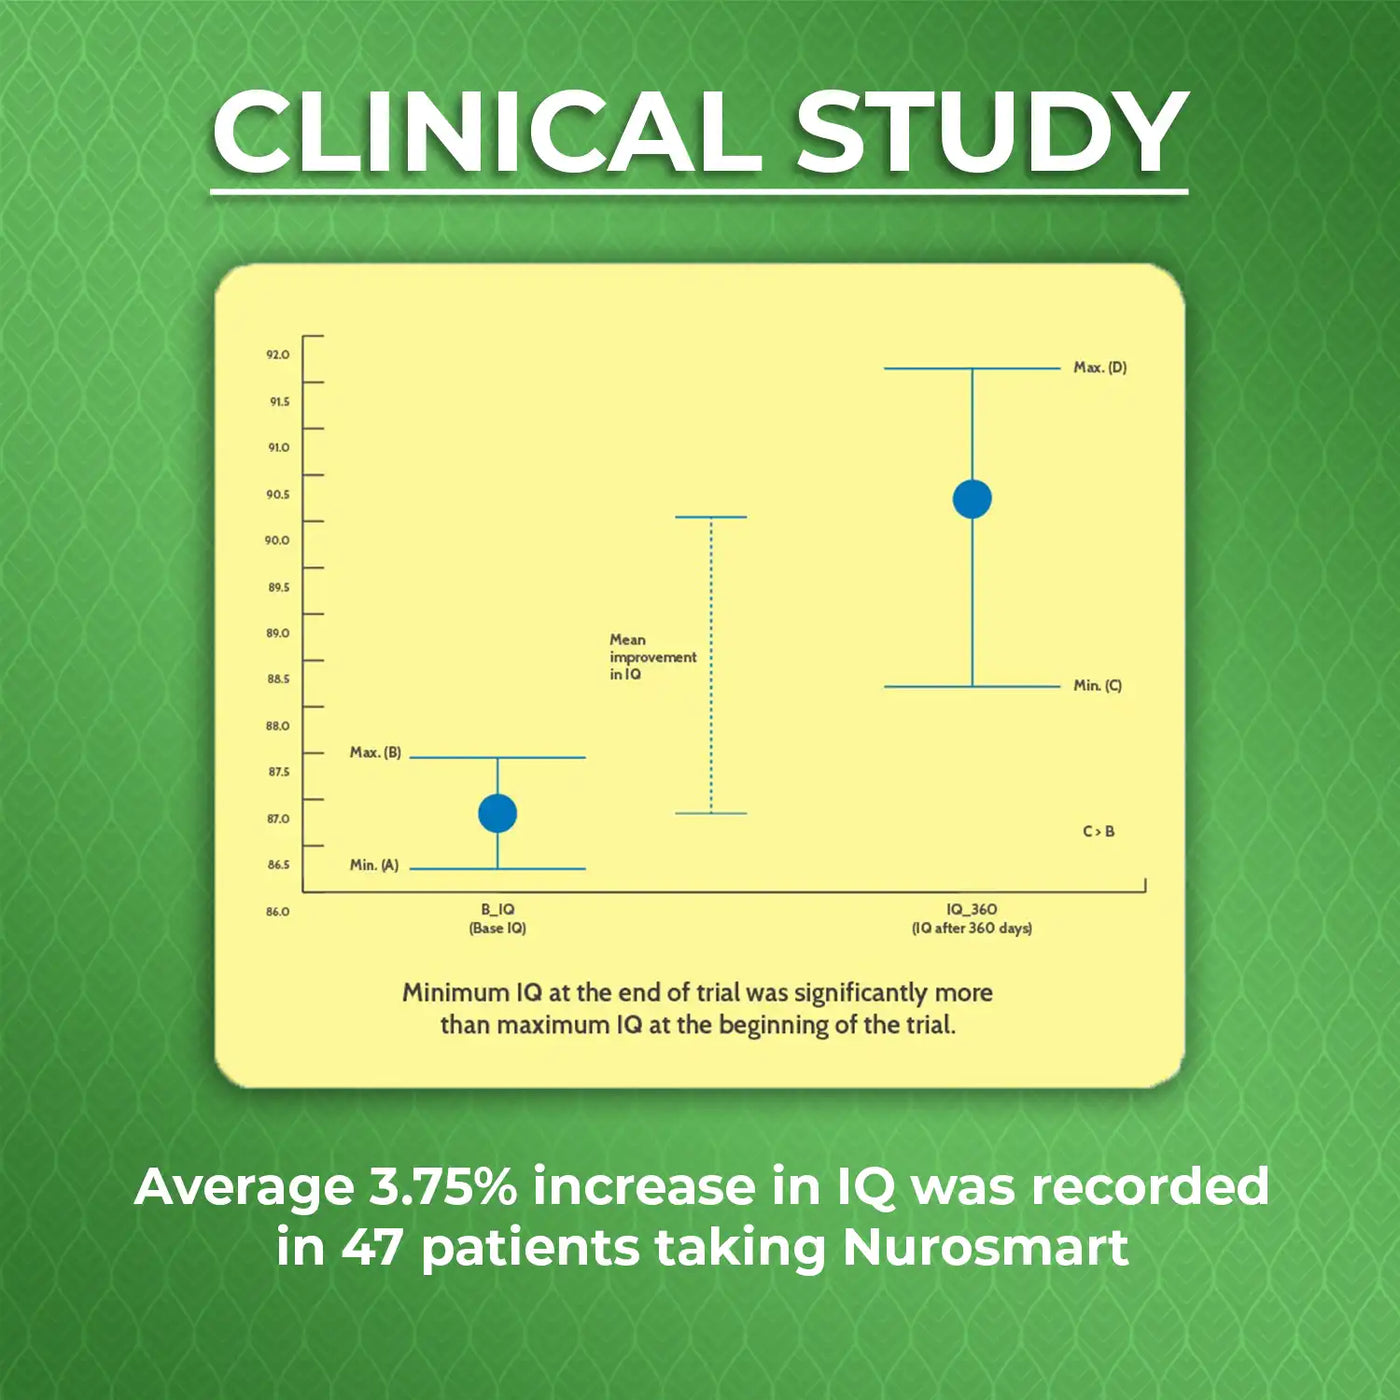 clinical study proving increased IQ by 3.75% with use of nurosmart syrup